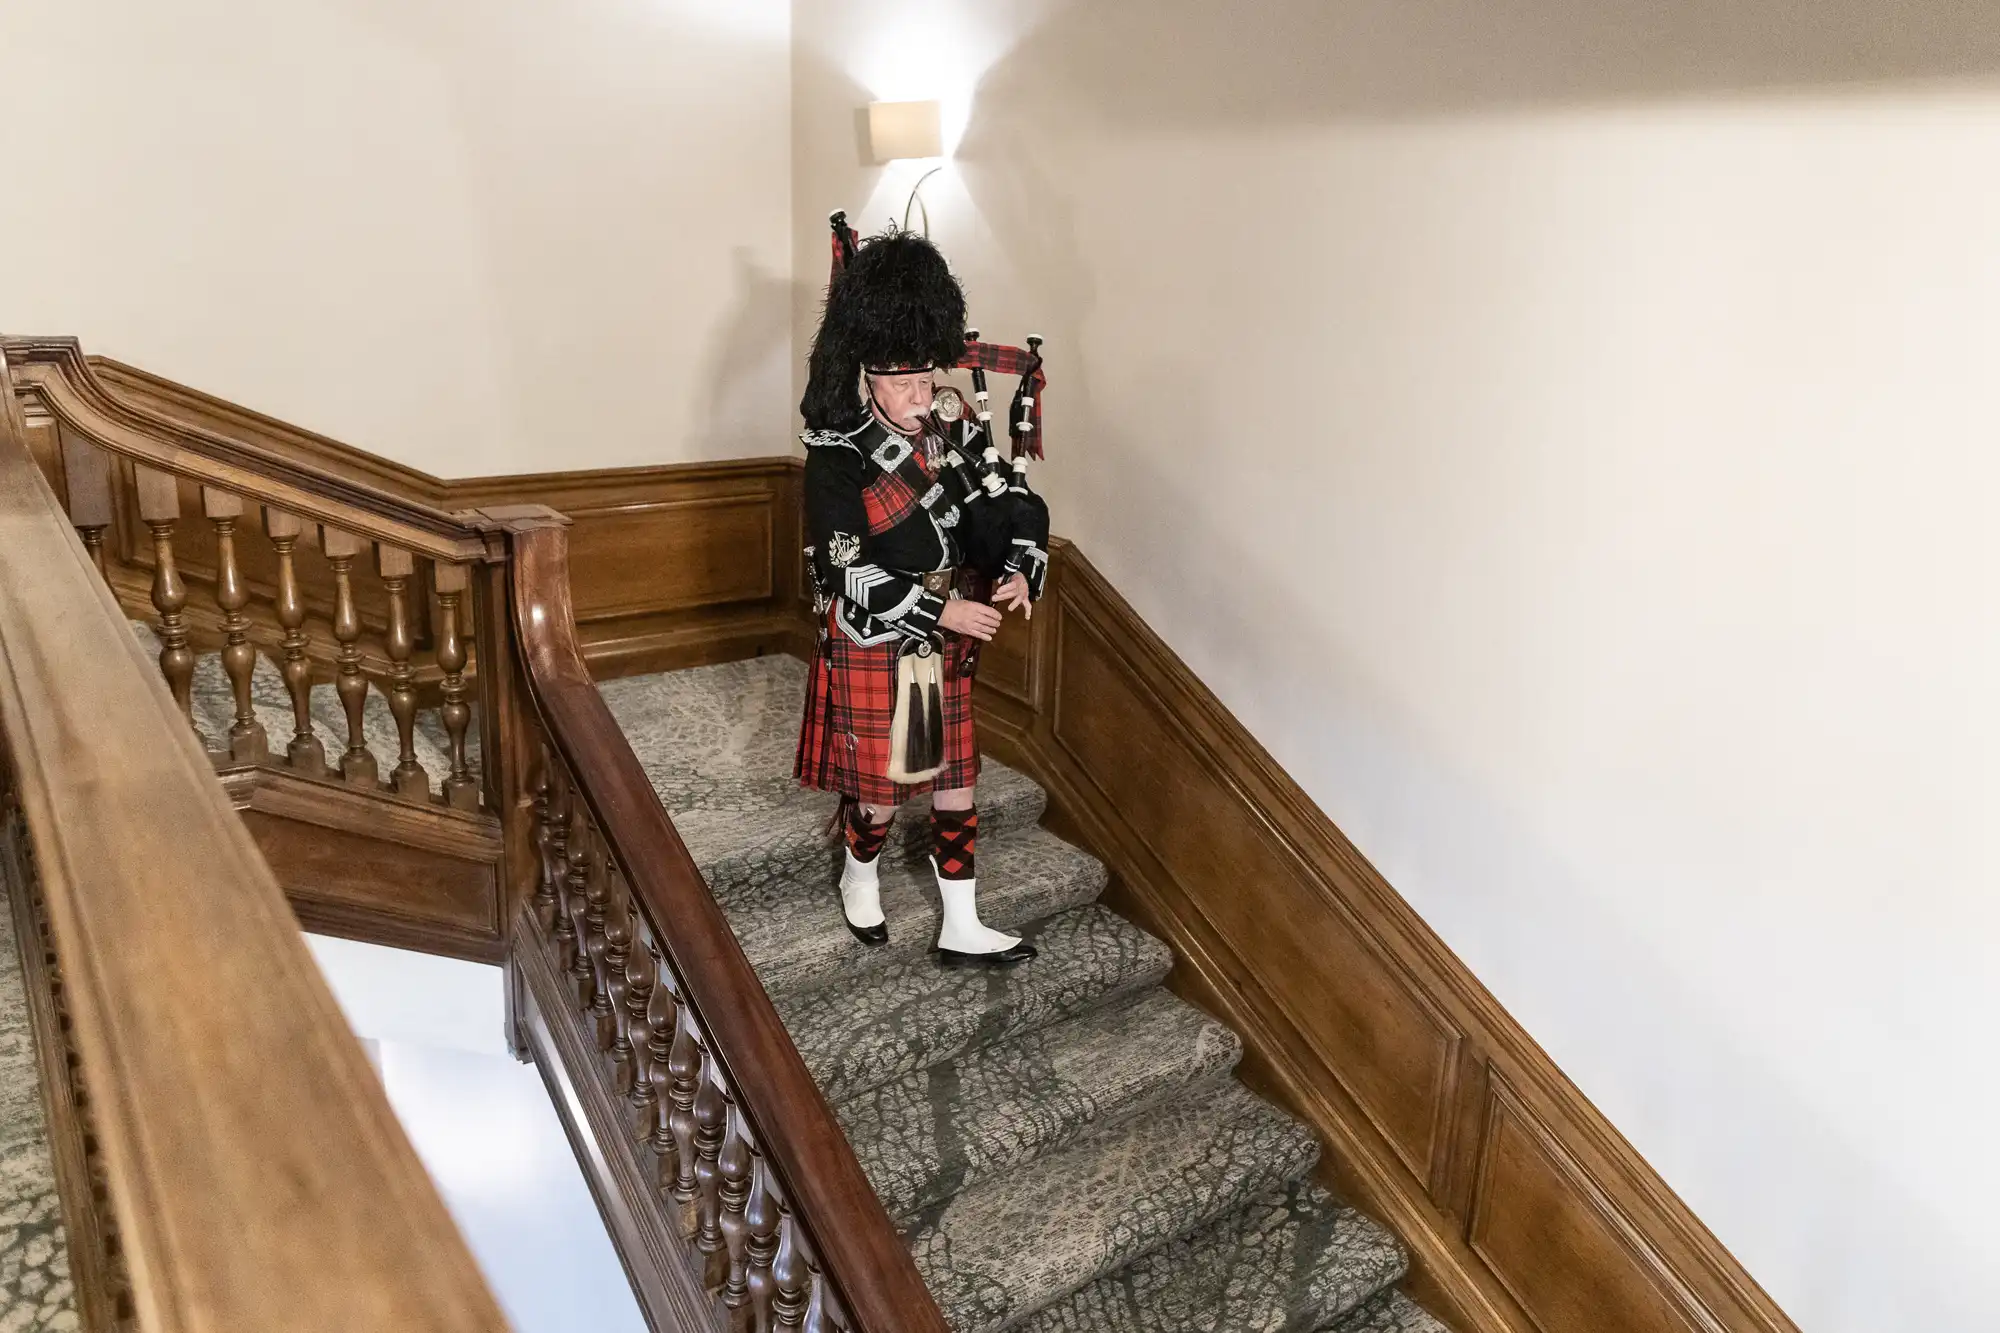 A person dressed in traditional Scottish attire, including a kilt and a feathered hat, plays bagpipes while descending a wooden staircase.